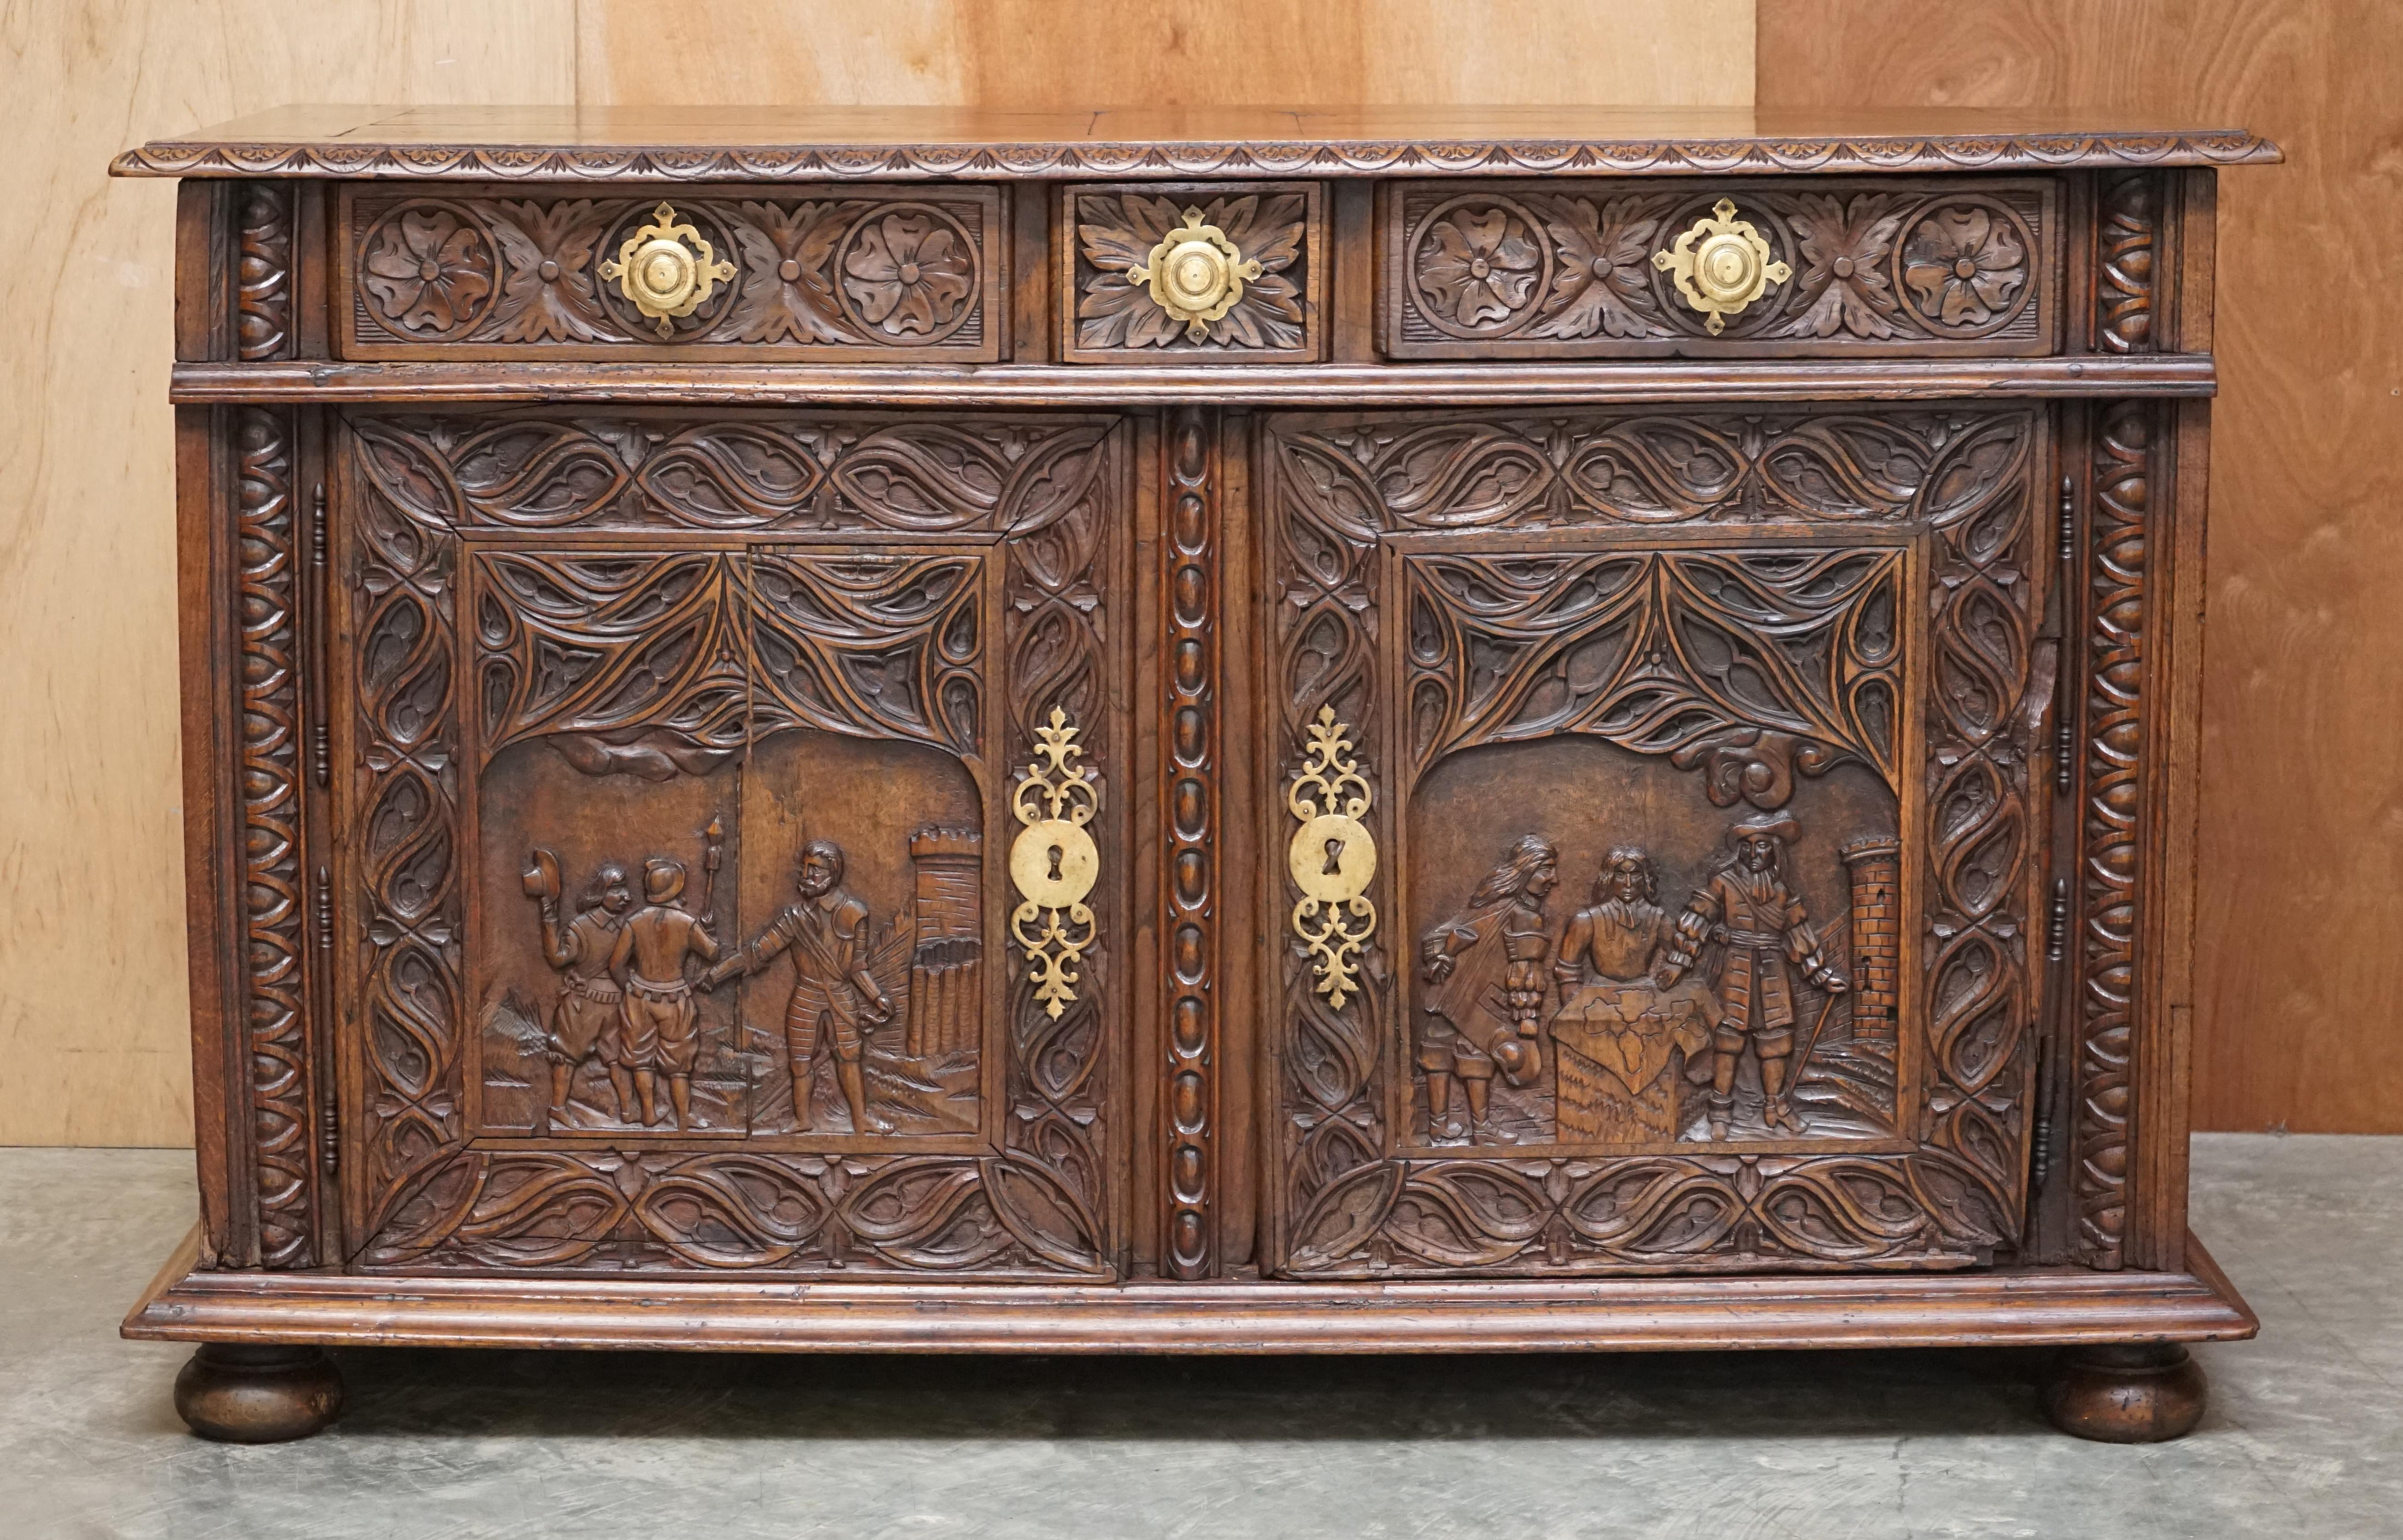 We are delighted to offer this lovely hand carved continental oak sideboard with militaria style front panels 

An expertly crafted piece, this is pure art furniture and looks amazing from every angle. Its continental, most likely Austrian or